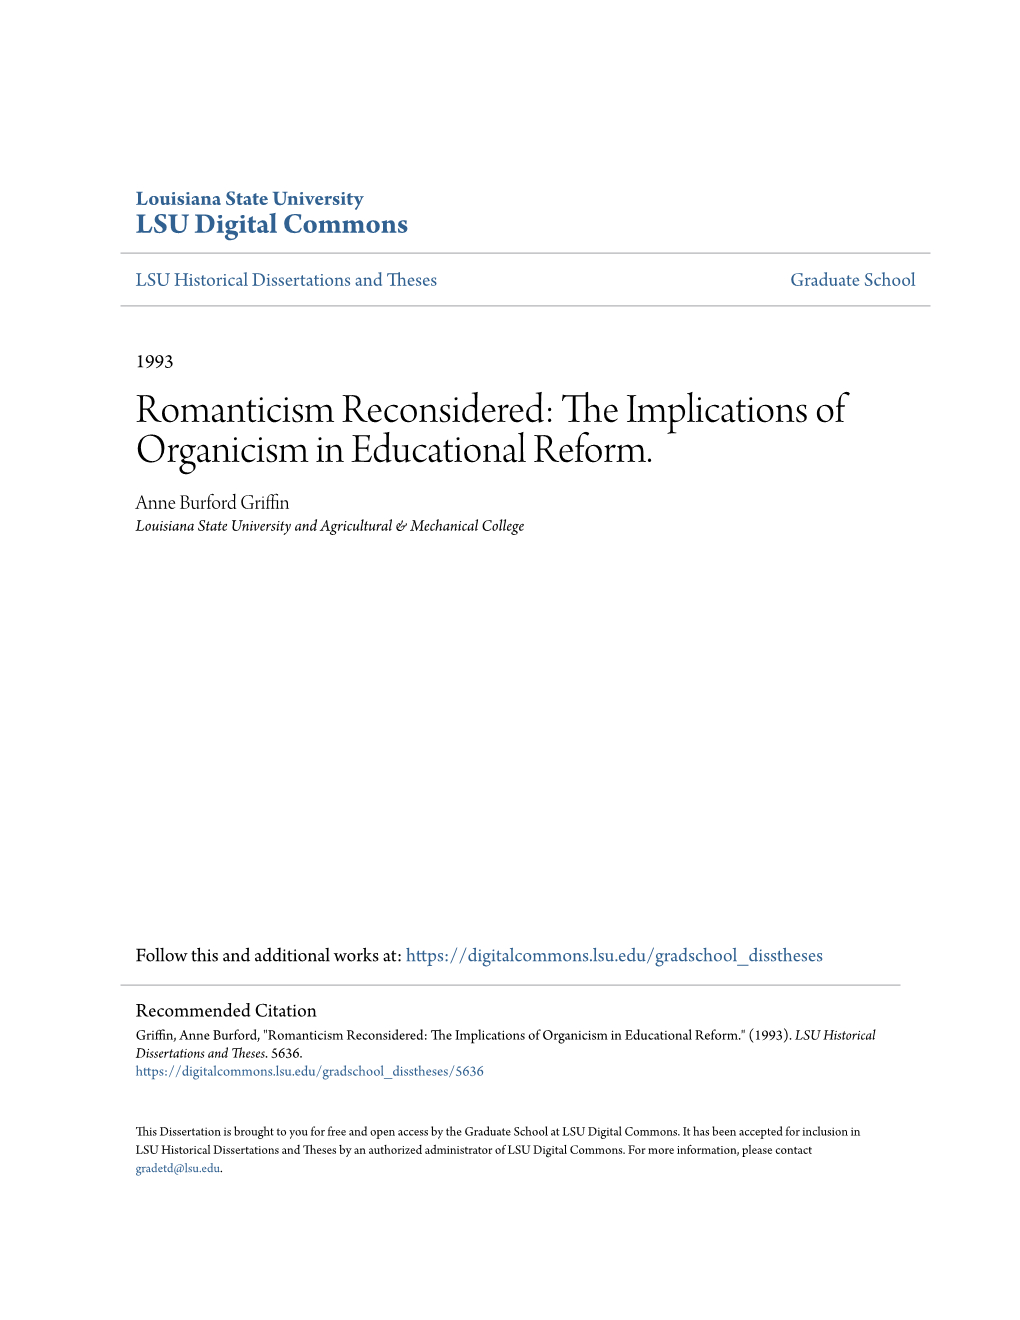 Romanticism Reconsidered: the Mplici Ations of Organicism in Educational Reform